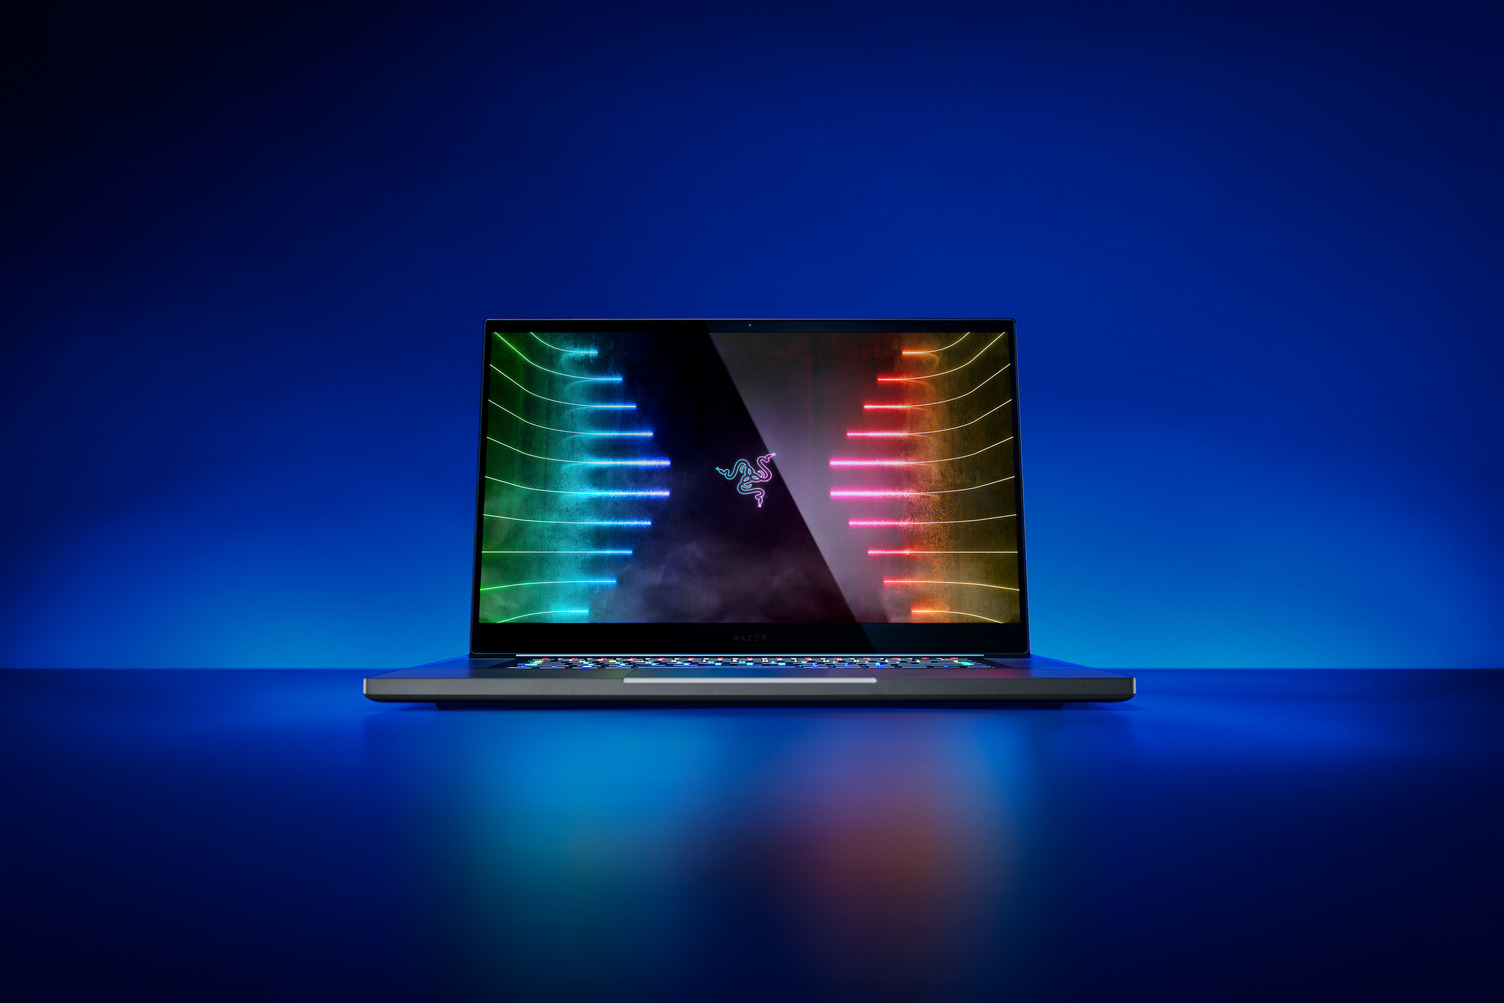 RAZER ANNOUNCES NEW BLADE 17 WITH MOST POWERFUL INTEL PROCESSOR EVER